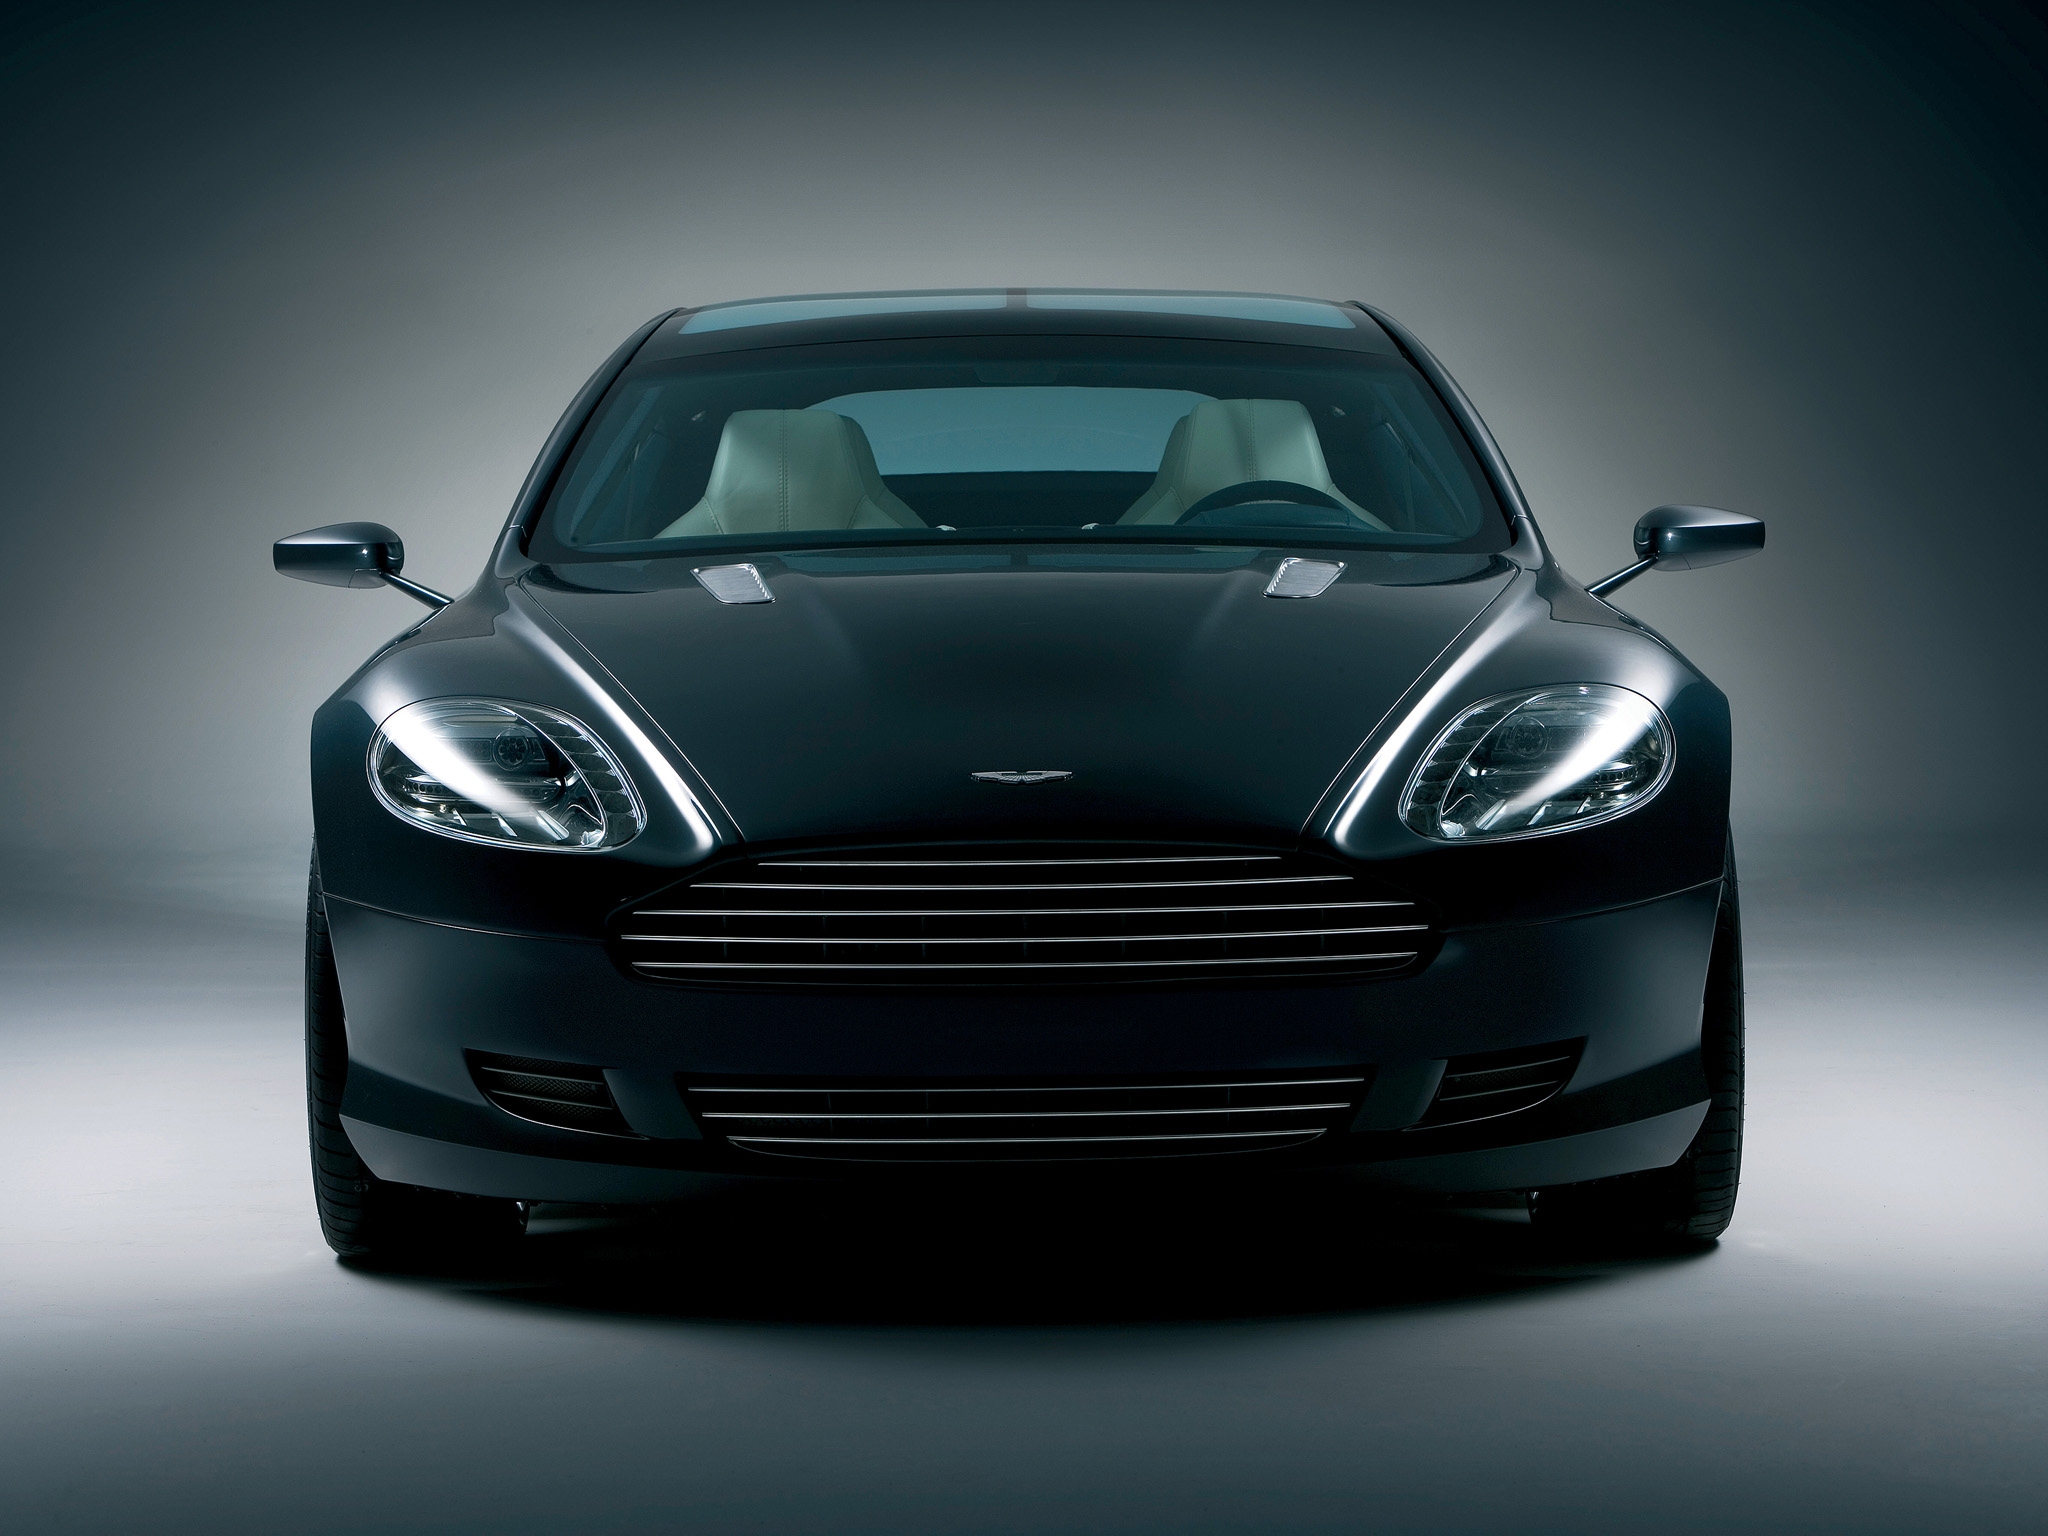 front view, black, aston martin, cars Cell Phone Image